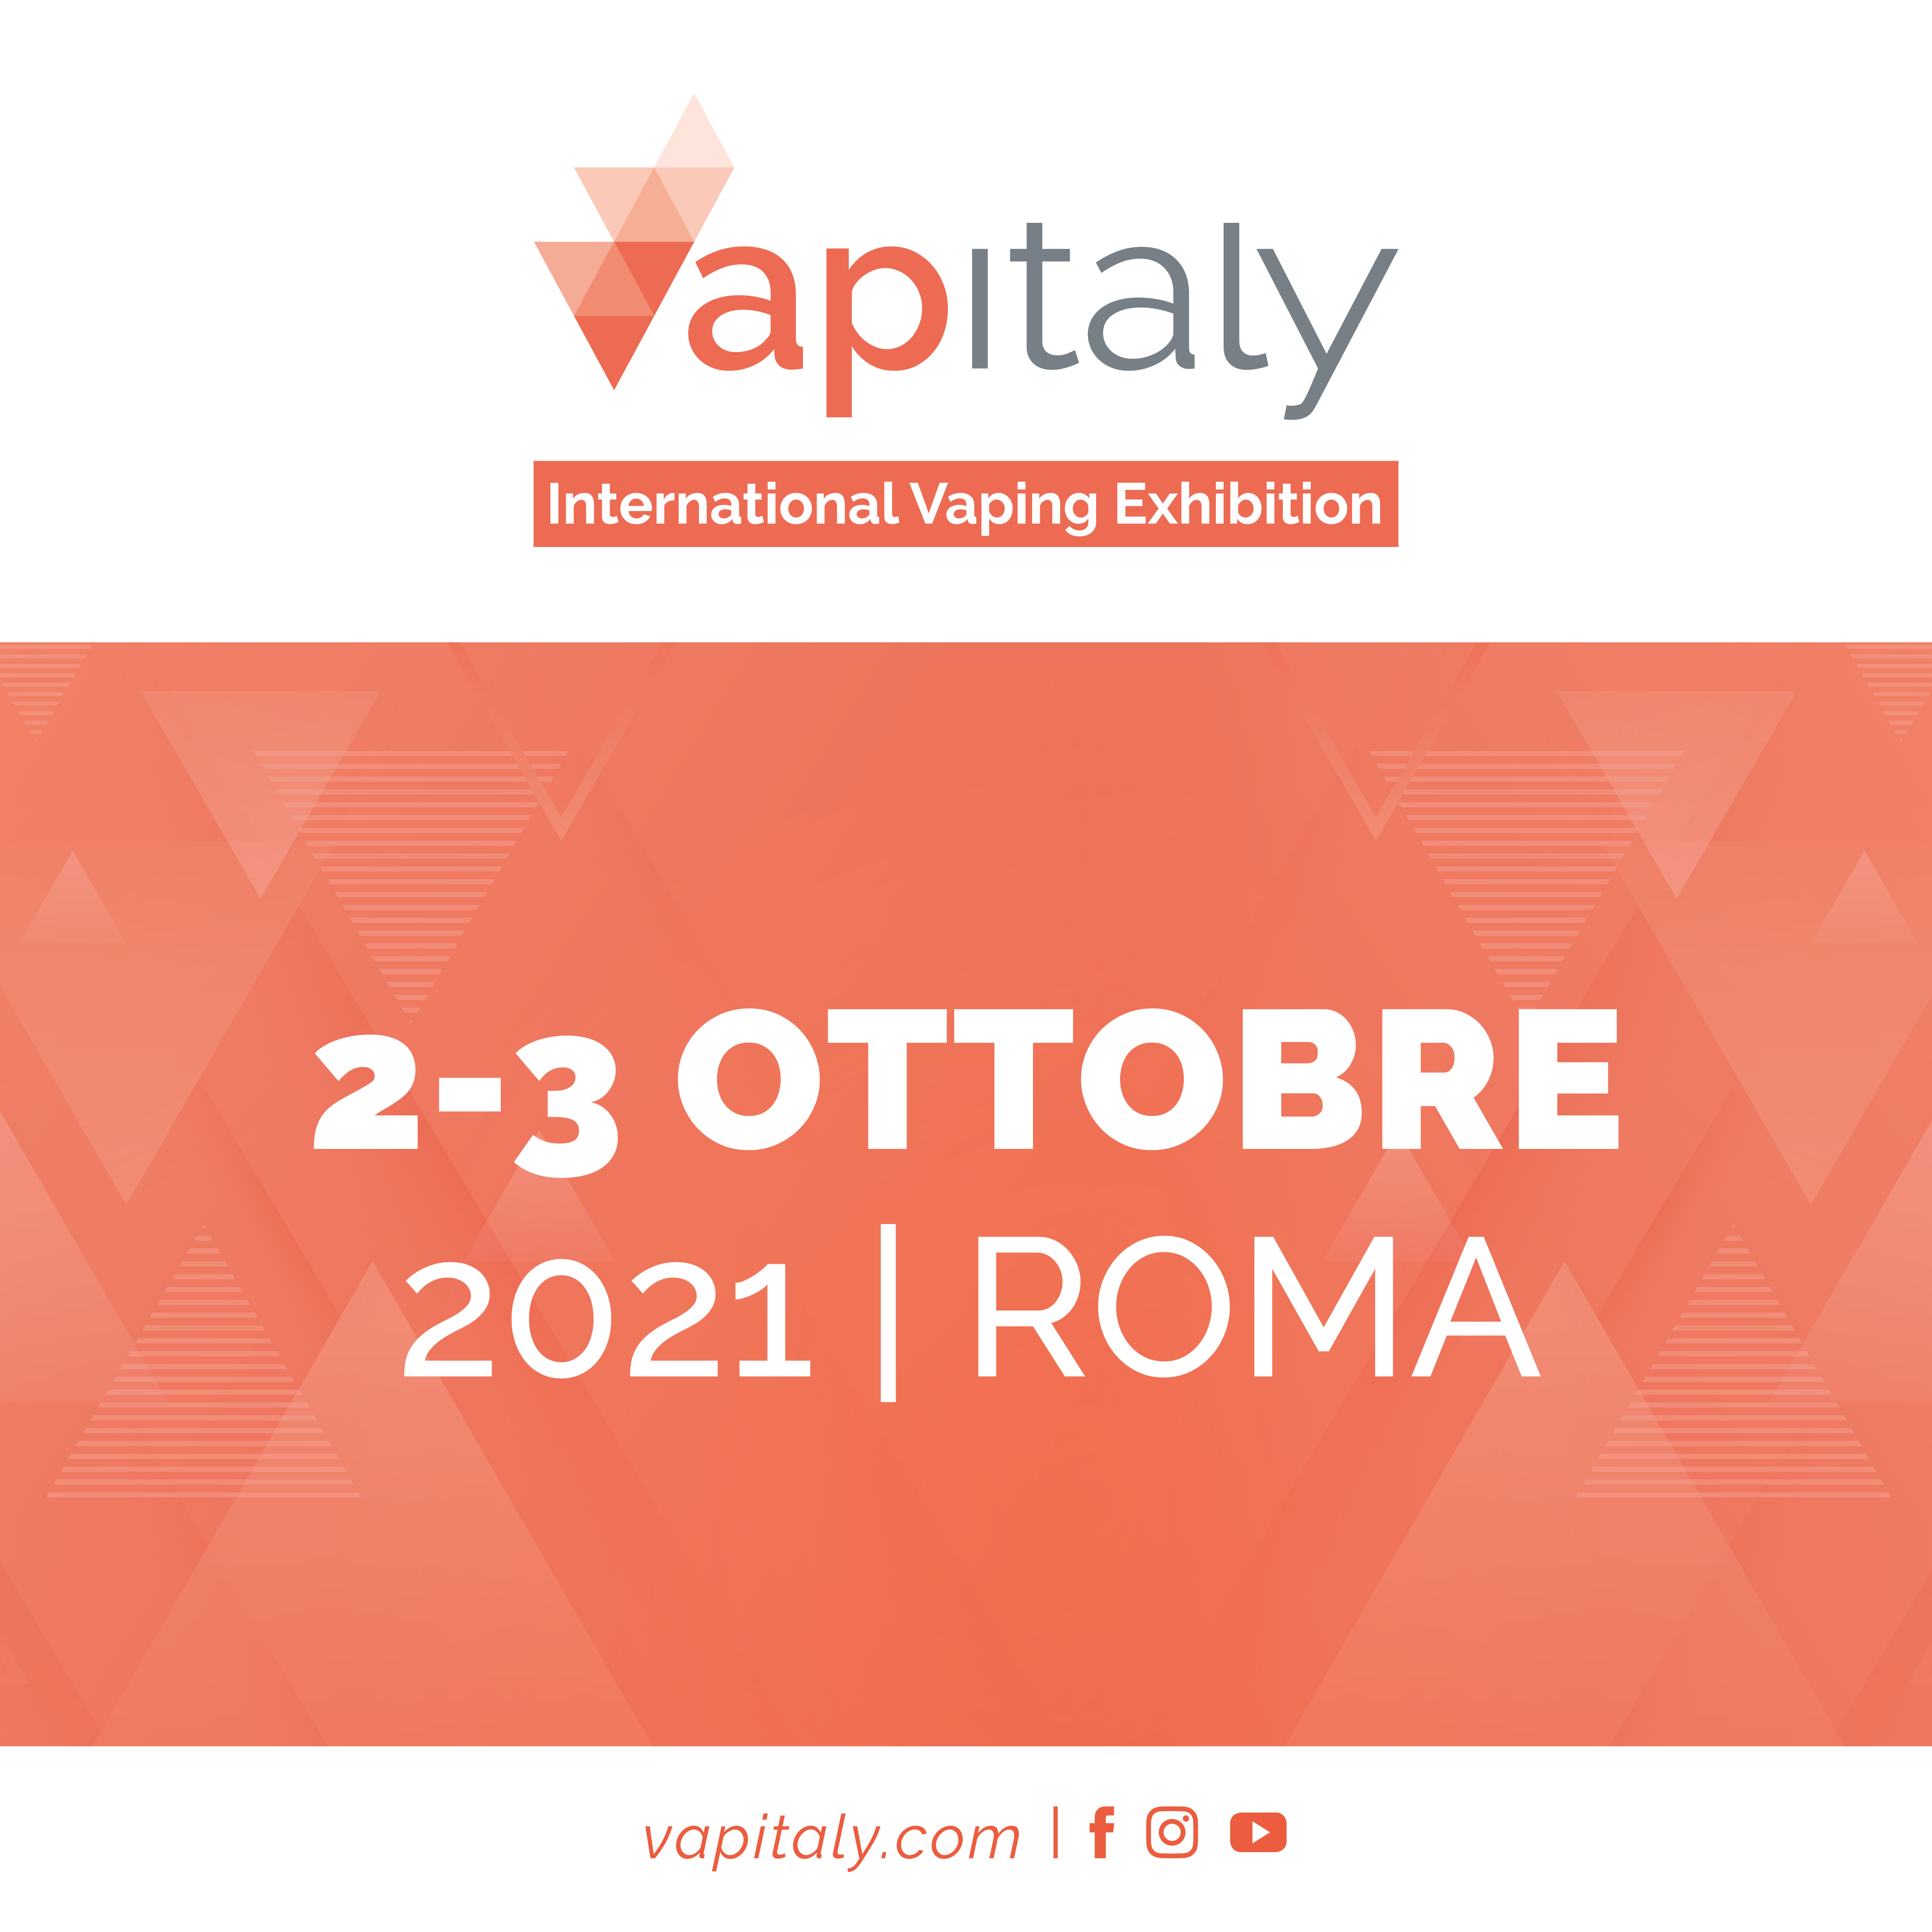 Vapitaly 2021 will be held! Here are dates and location